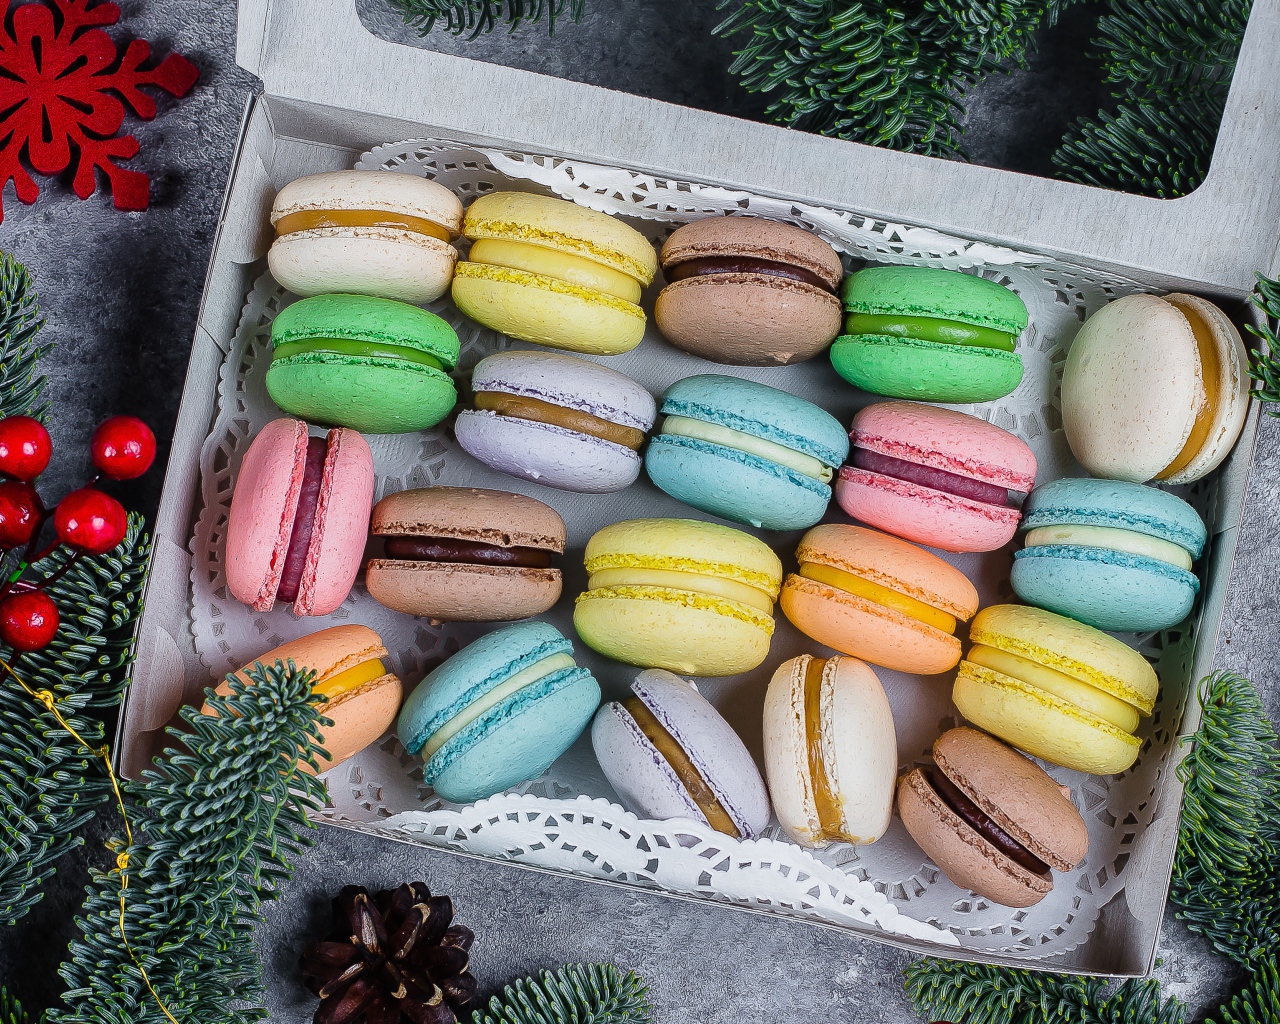 Colorful macaroon cookies in a box on the table